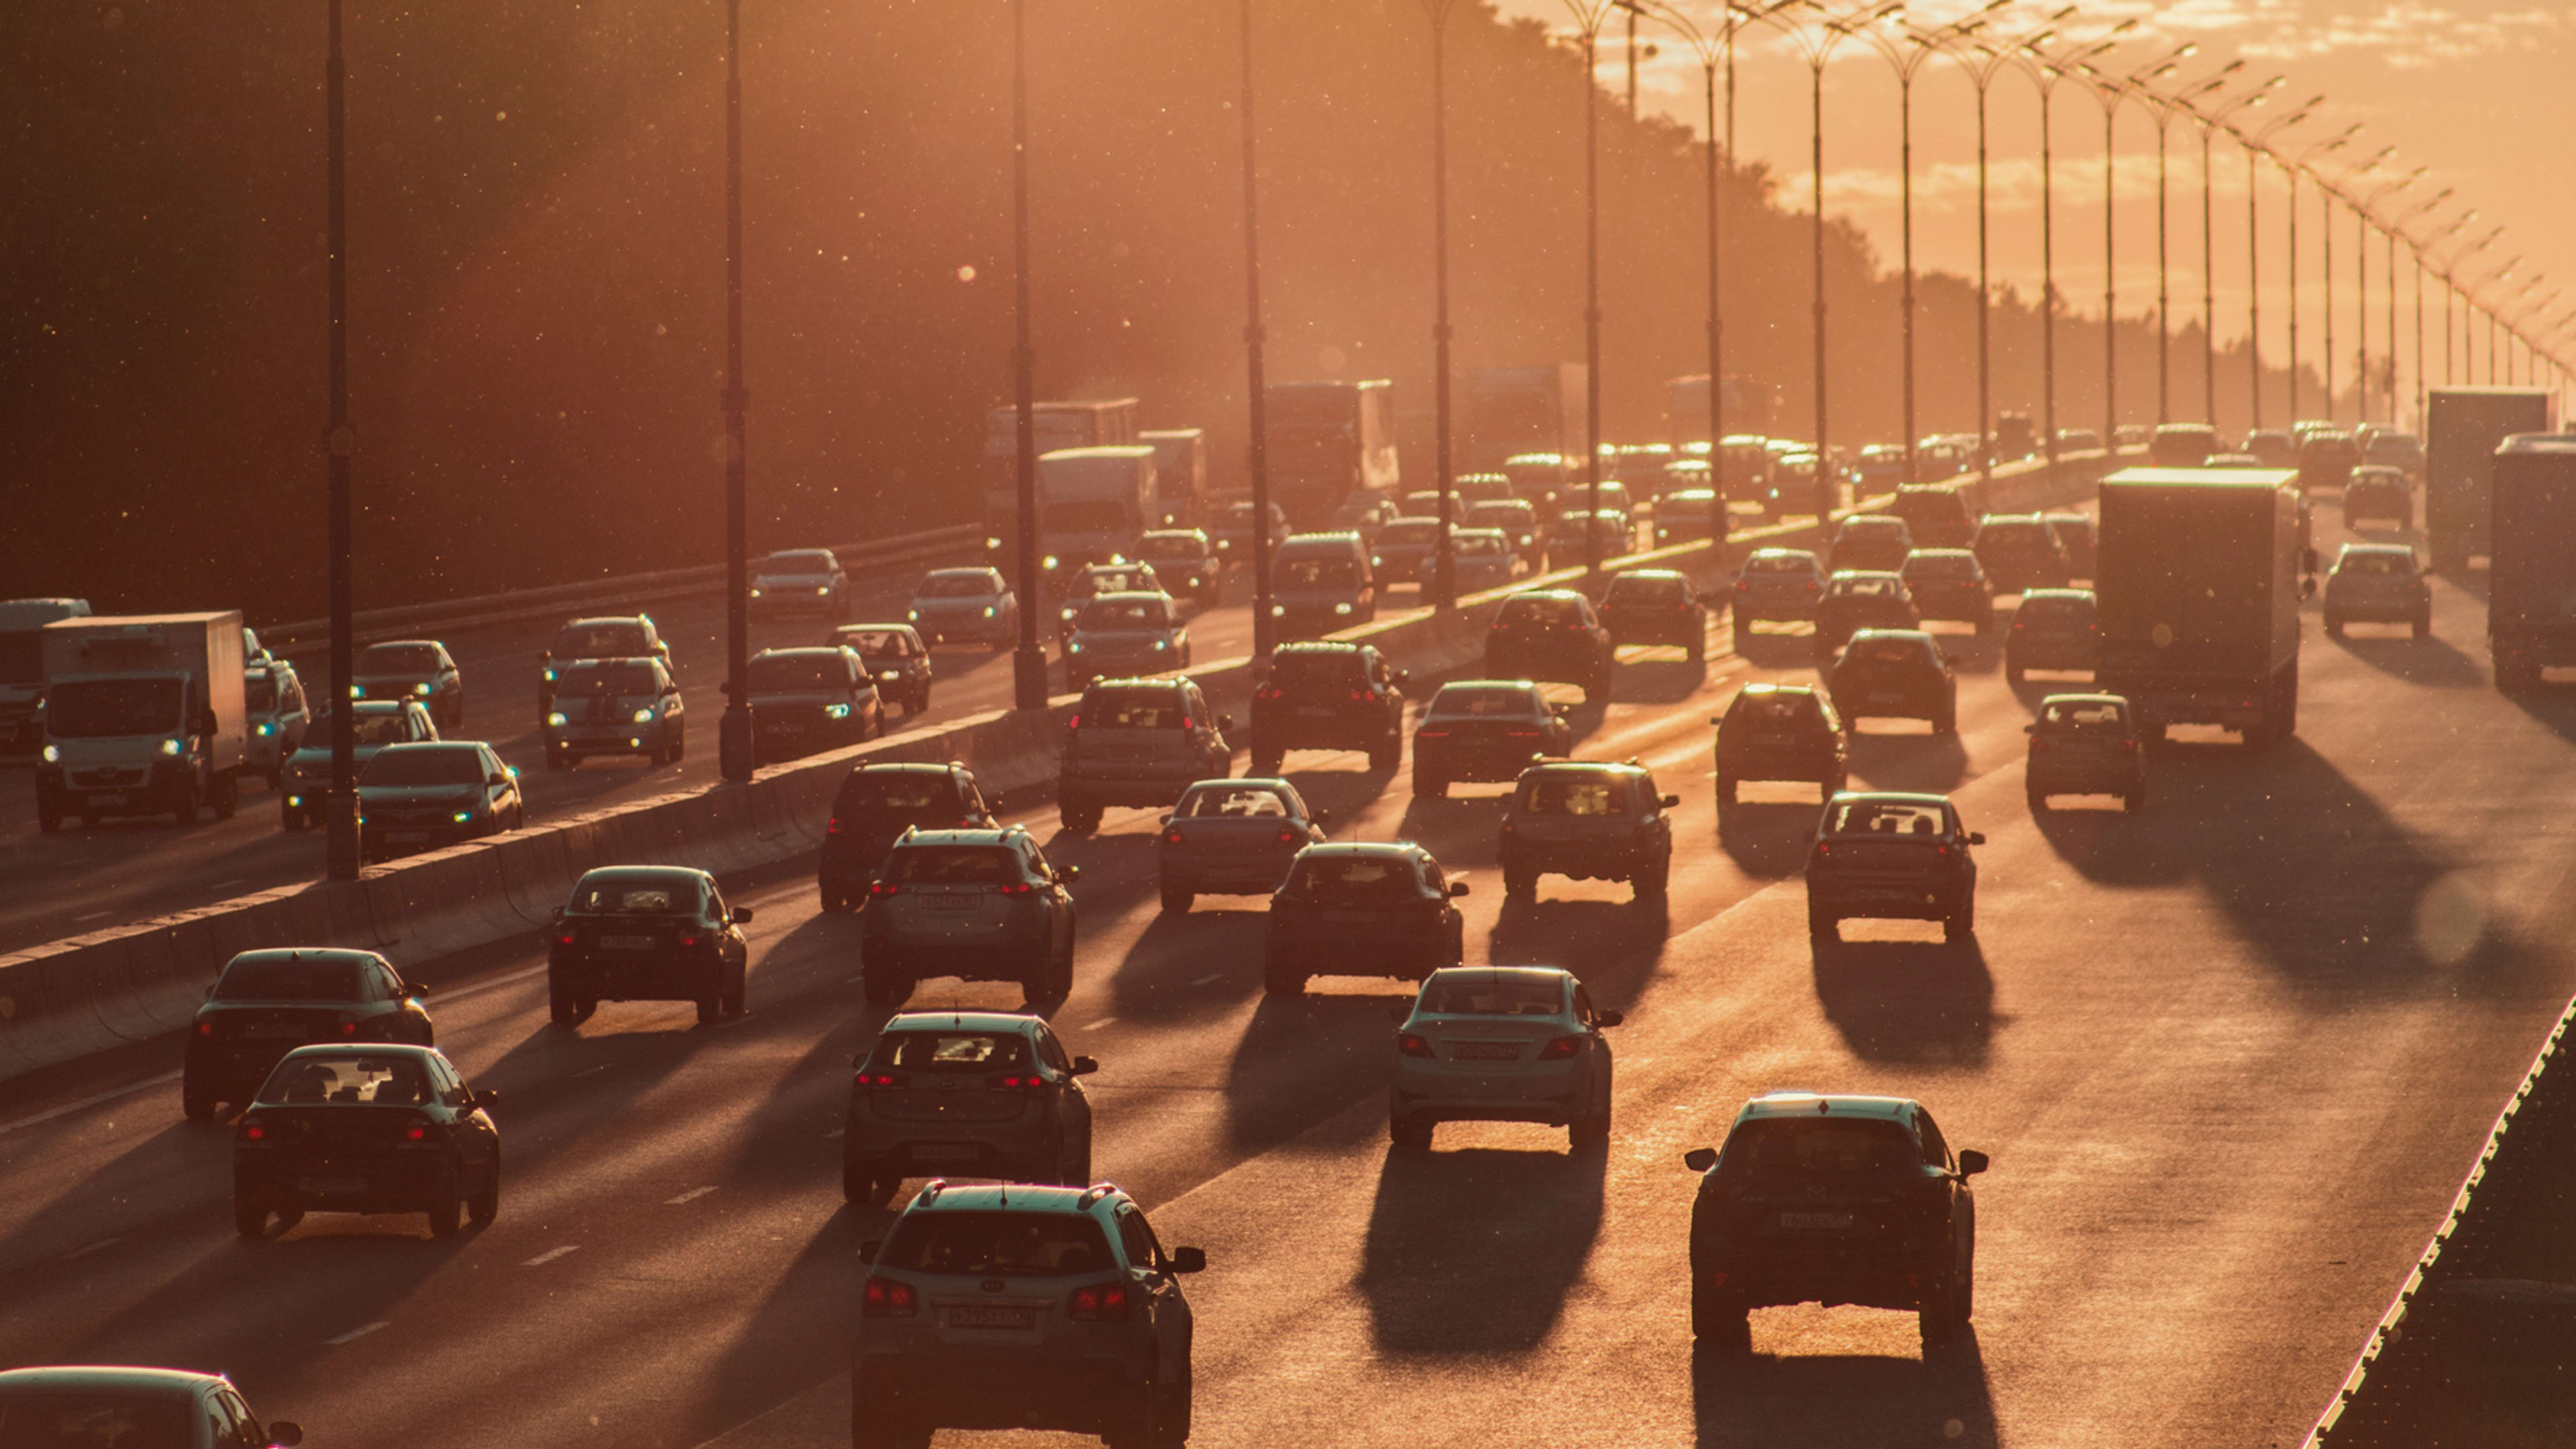 Celebrate America’s independence by sitting in traffic. Yes, it’s worse than ever.